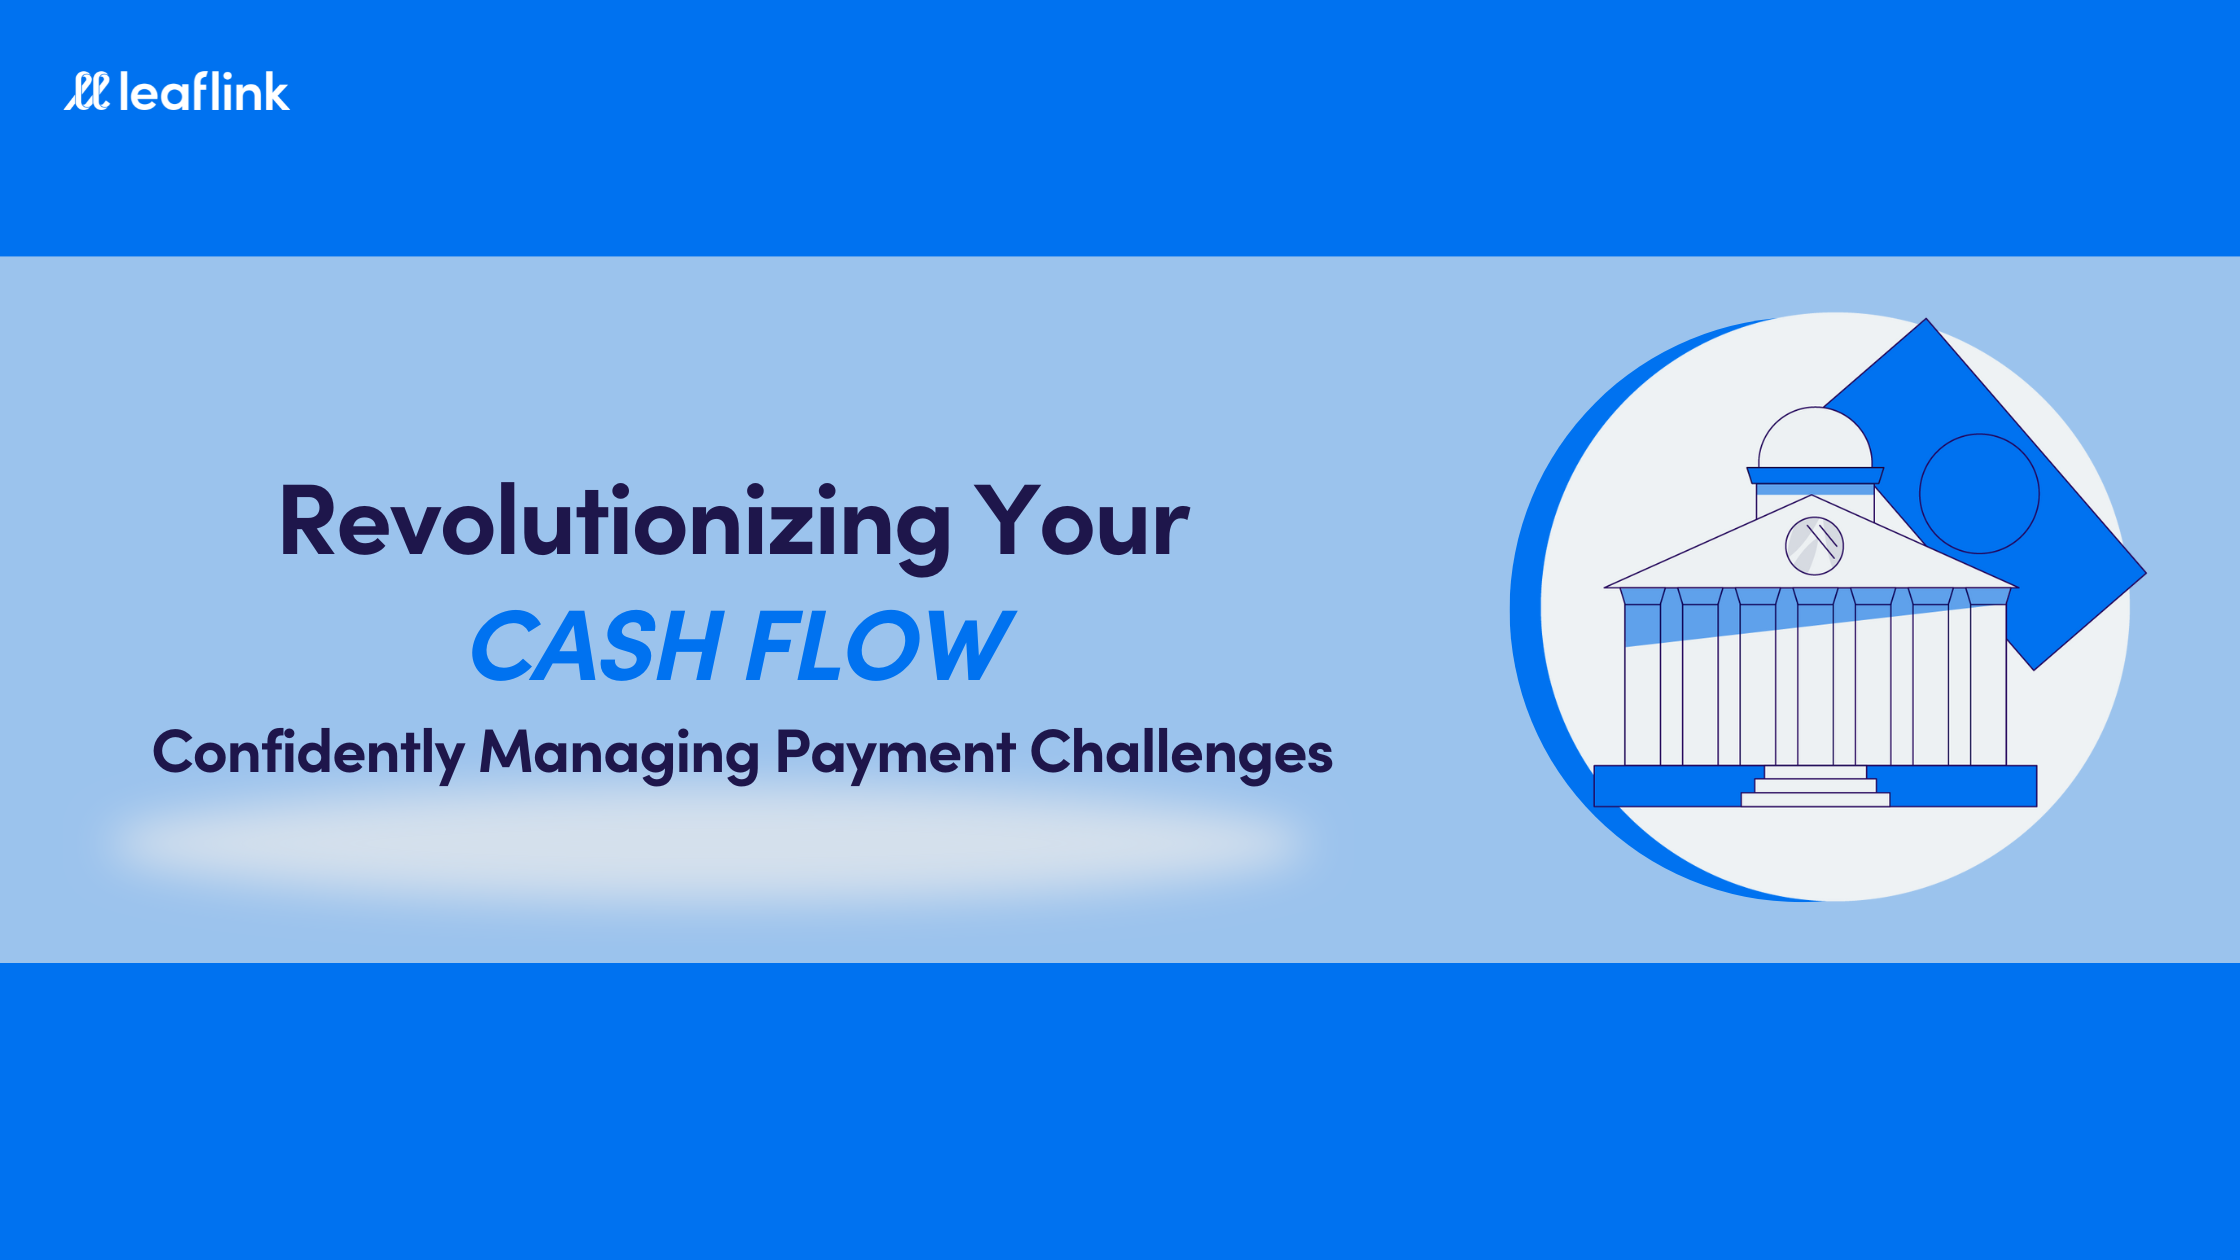 Revolutionizing Your Cash Flow: Confidently Managing Payment Challenges